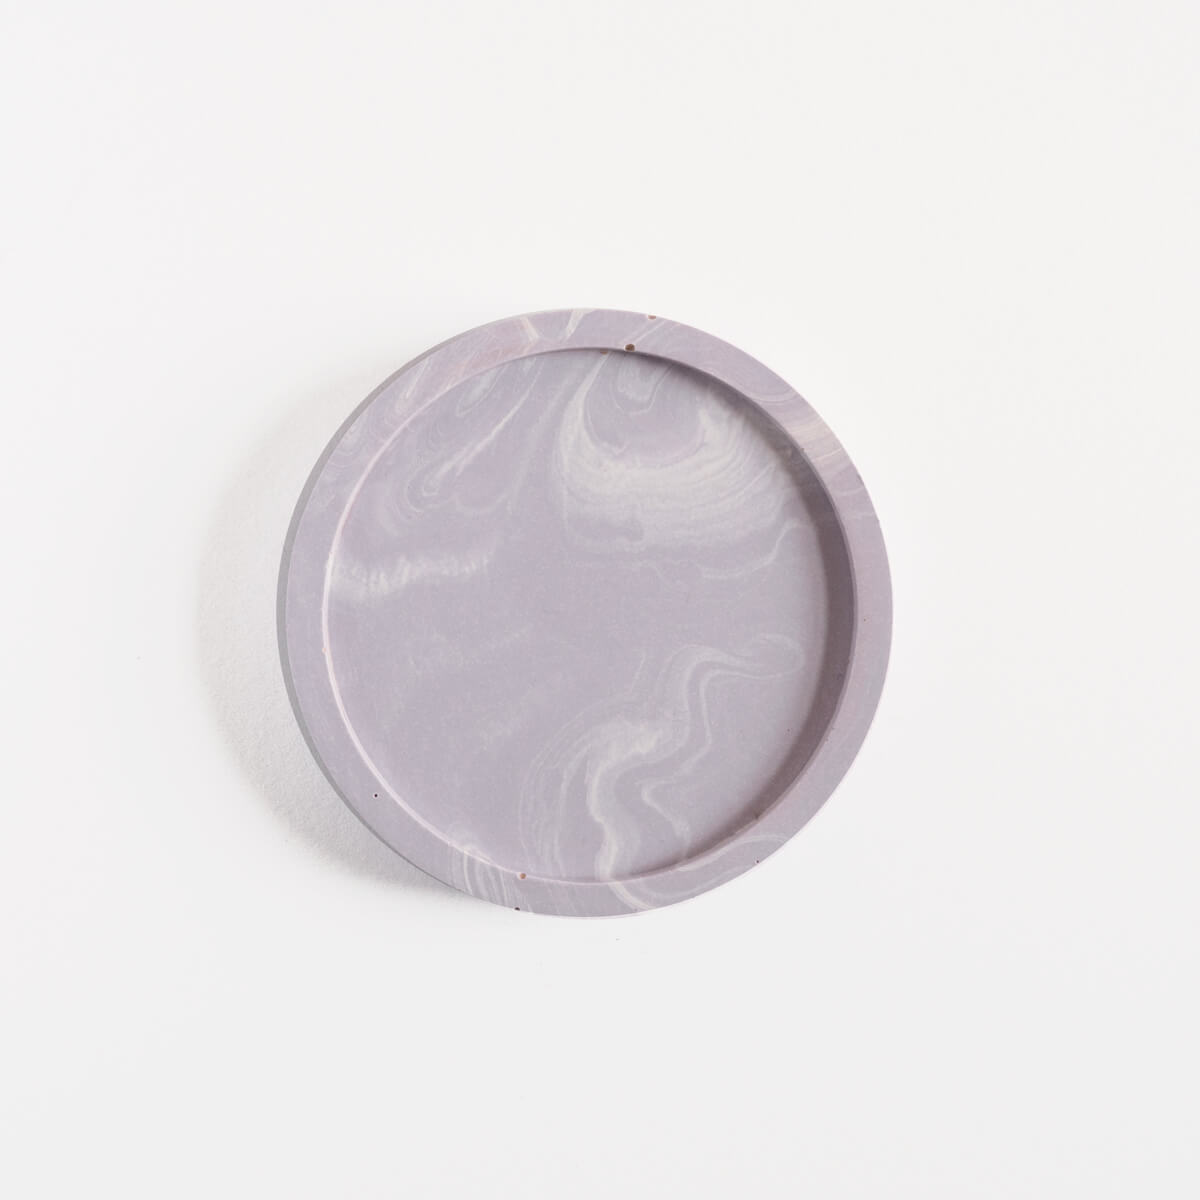 A single marbled lilac round coaster handmade by Klndra for Curious Makers